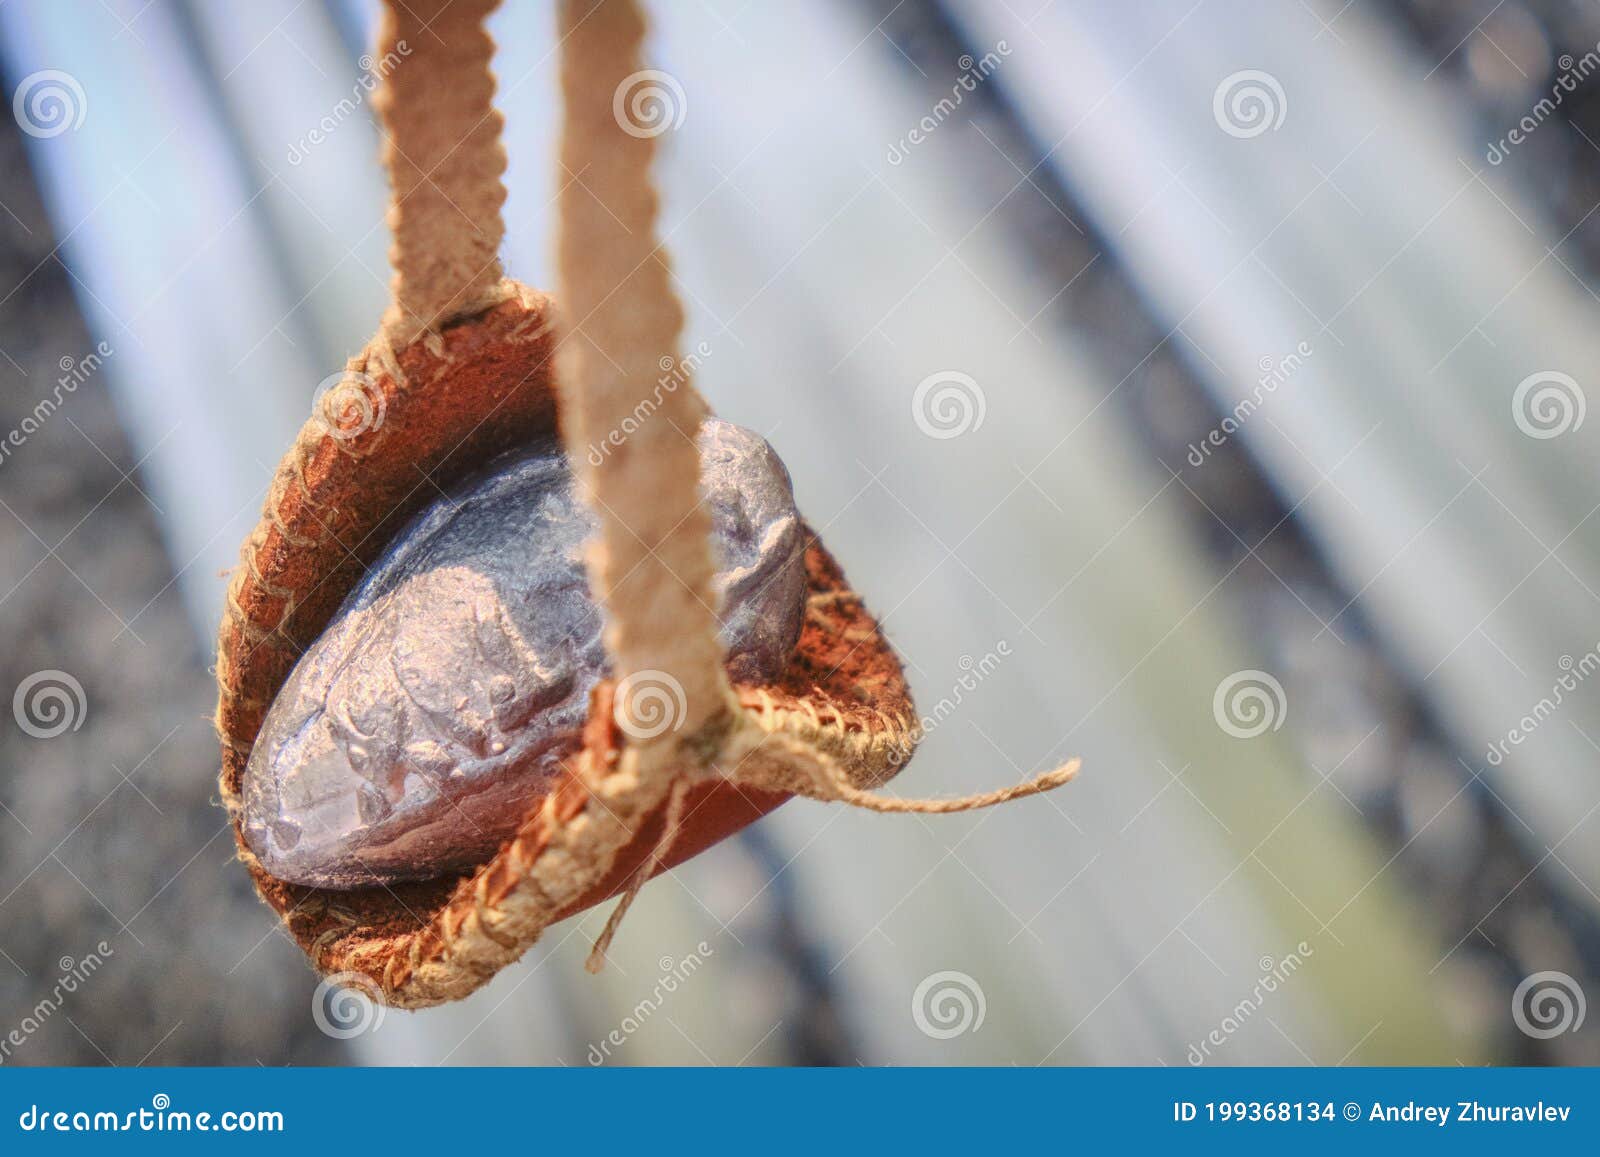 Roman Slingshot of Leather on the Background of Chain Mail